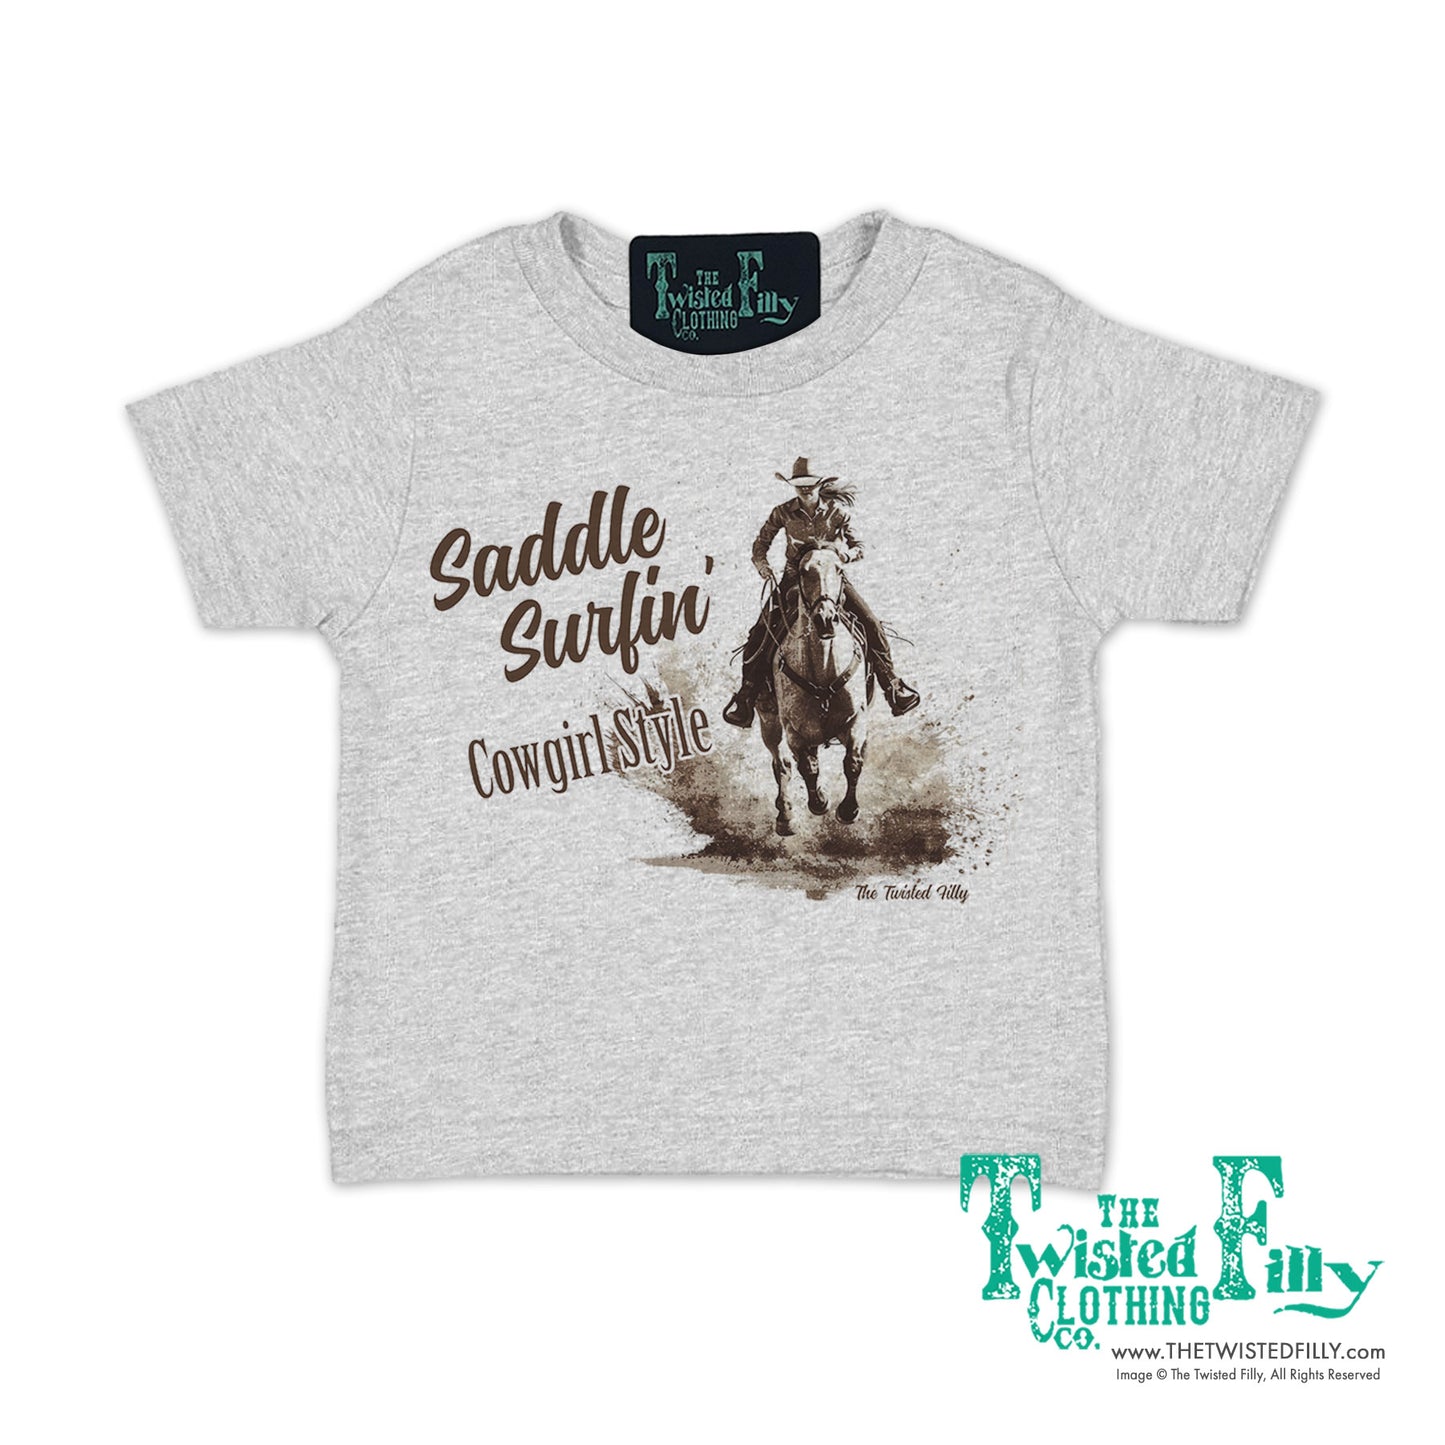 Saddle Surfin' Cowgirl Style - S/S Girls Infant Tee - Assorted Colors